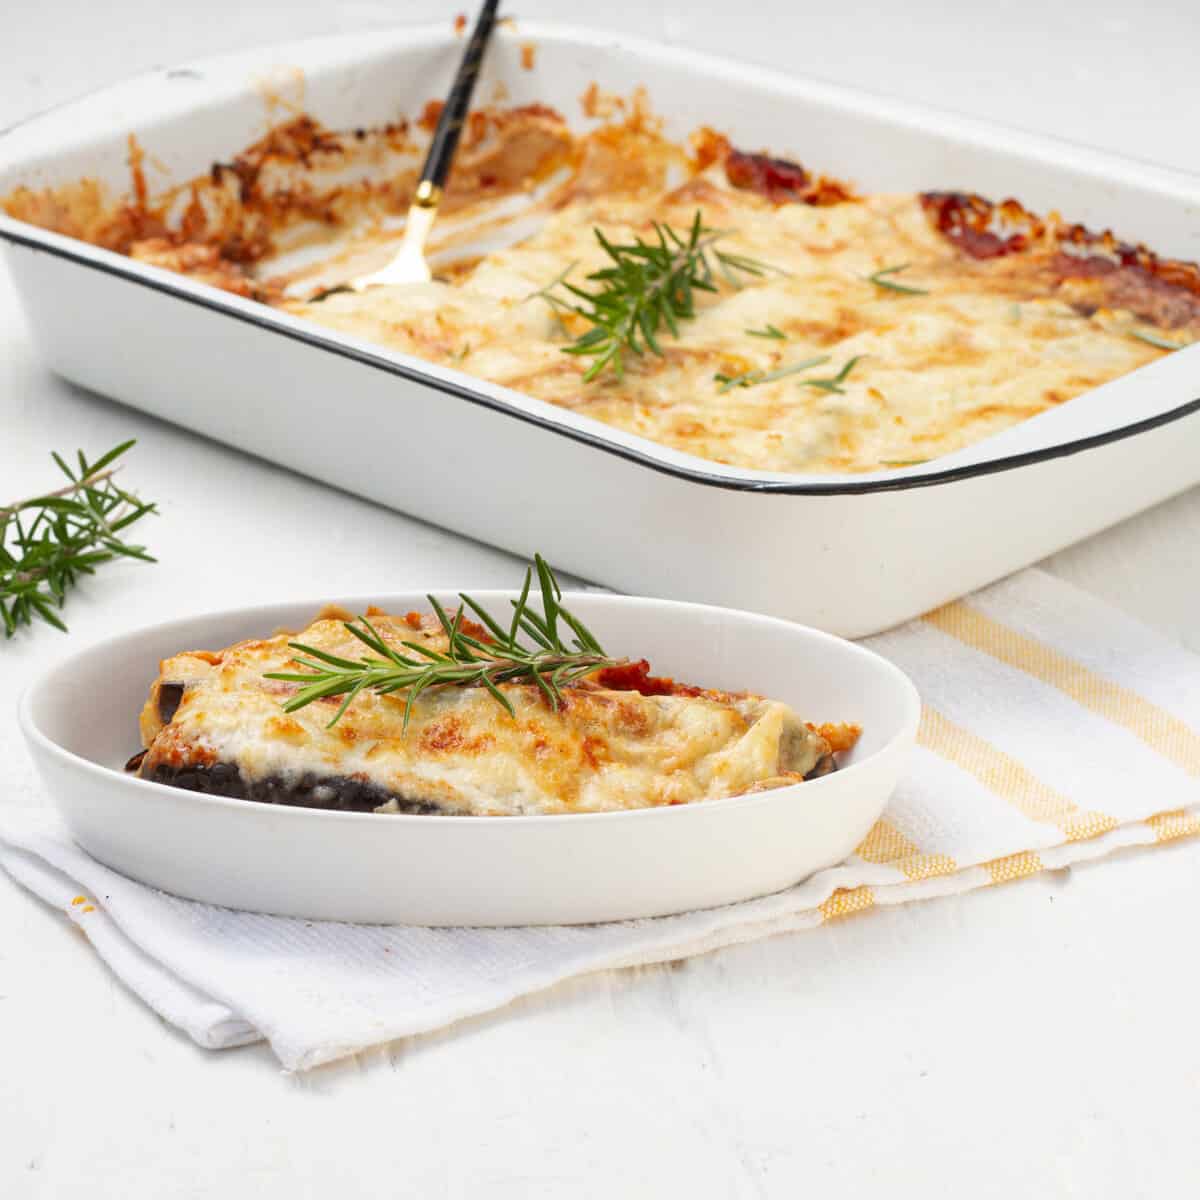 Eggplant Parmesan served in plate and baking tray